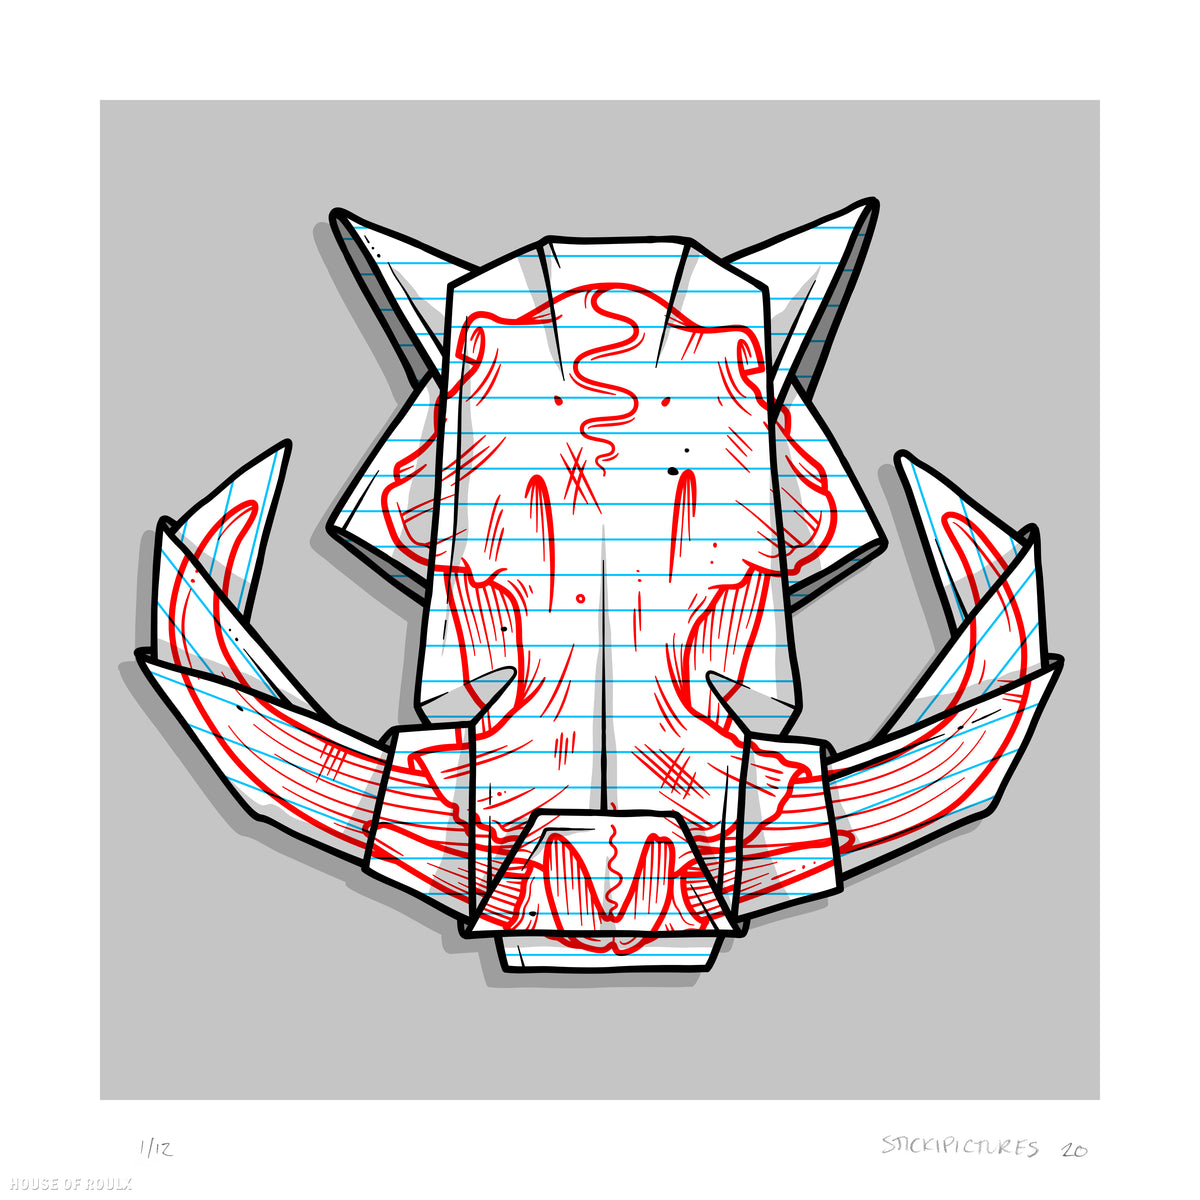 Stickipictures - &quot;Origami Warthog Skull&quot; - Archival Print, Limited Edition of 12 - 12 x 12&quot;